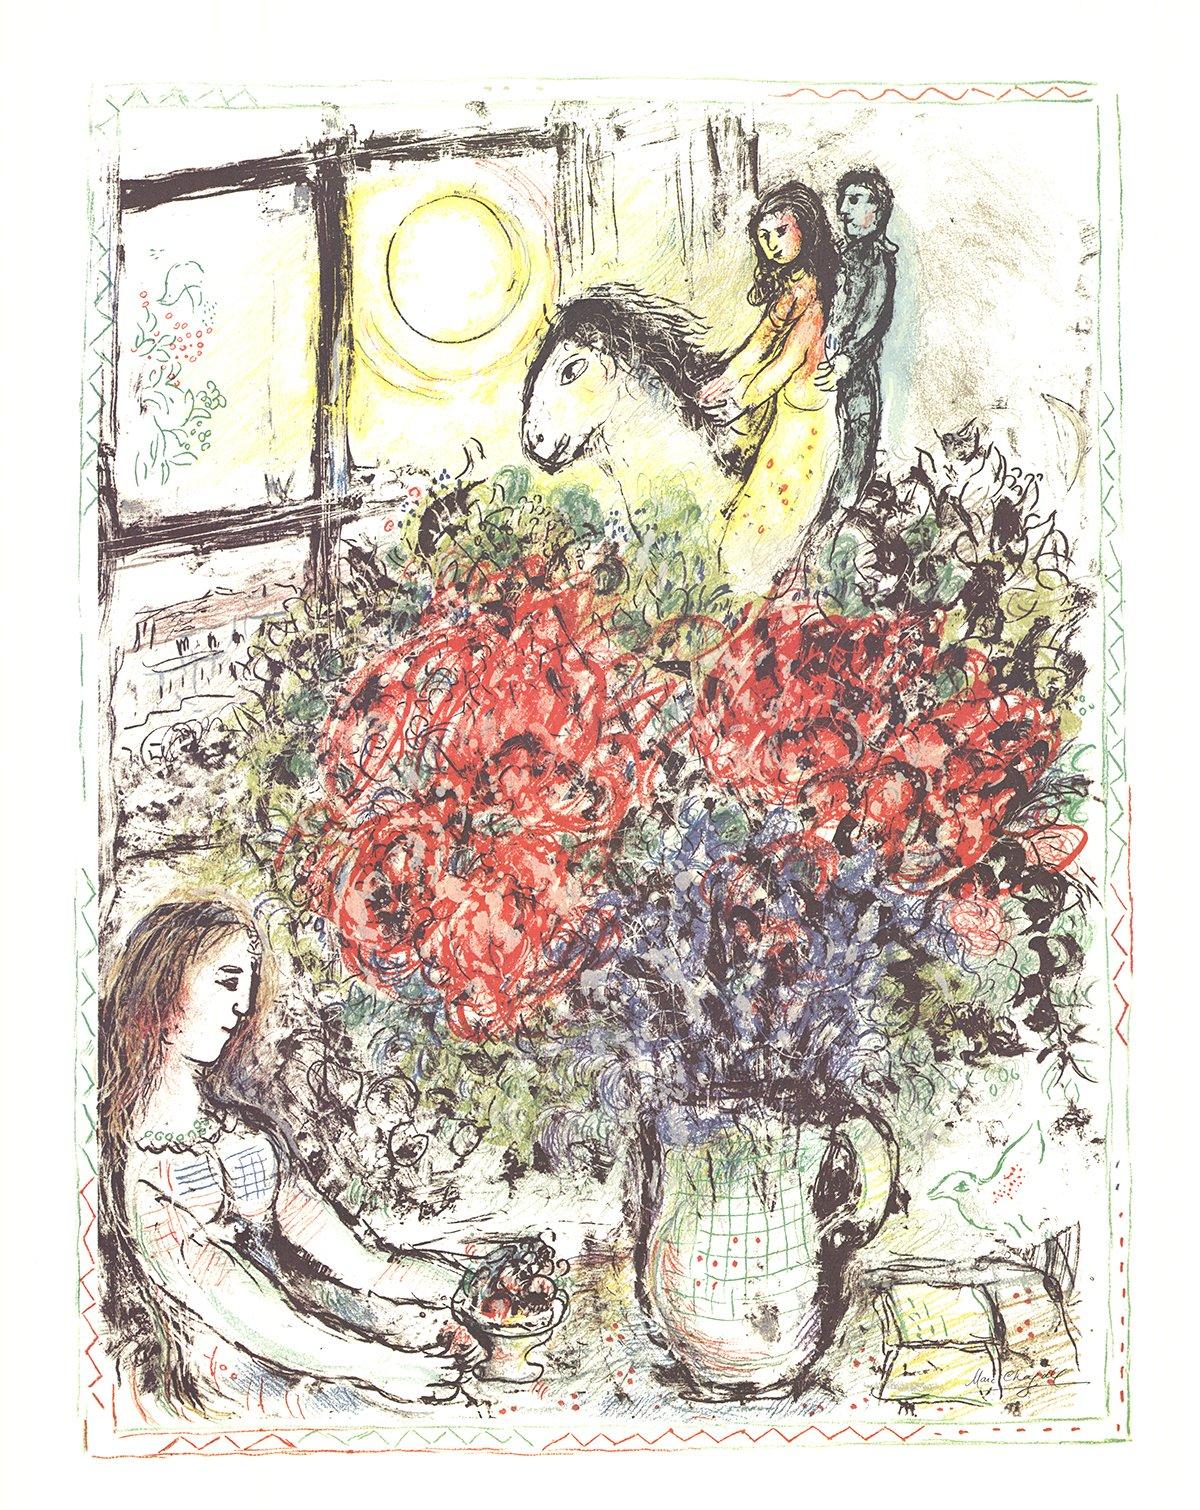 Paper Size: 27.25 x 22 inches ( 69.215 x 55.88 cm )
 Image Size: 24.5 x 19 inches ( 62.23 x 48.26 cm )
 Framed: No
 Condition: A: Mint
 
 Additional Details: Limited edition print by Marc Chagall titled "La Chevauchee" (The Horse ride). Signed in